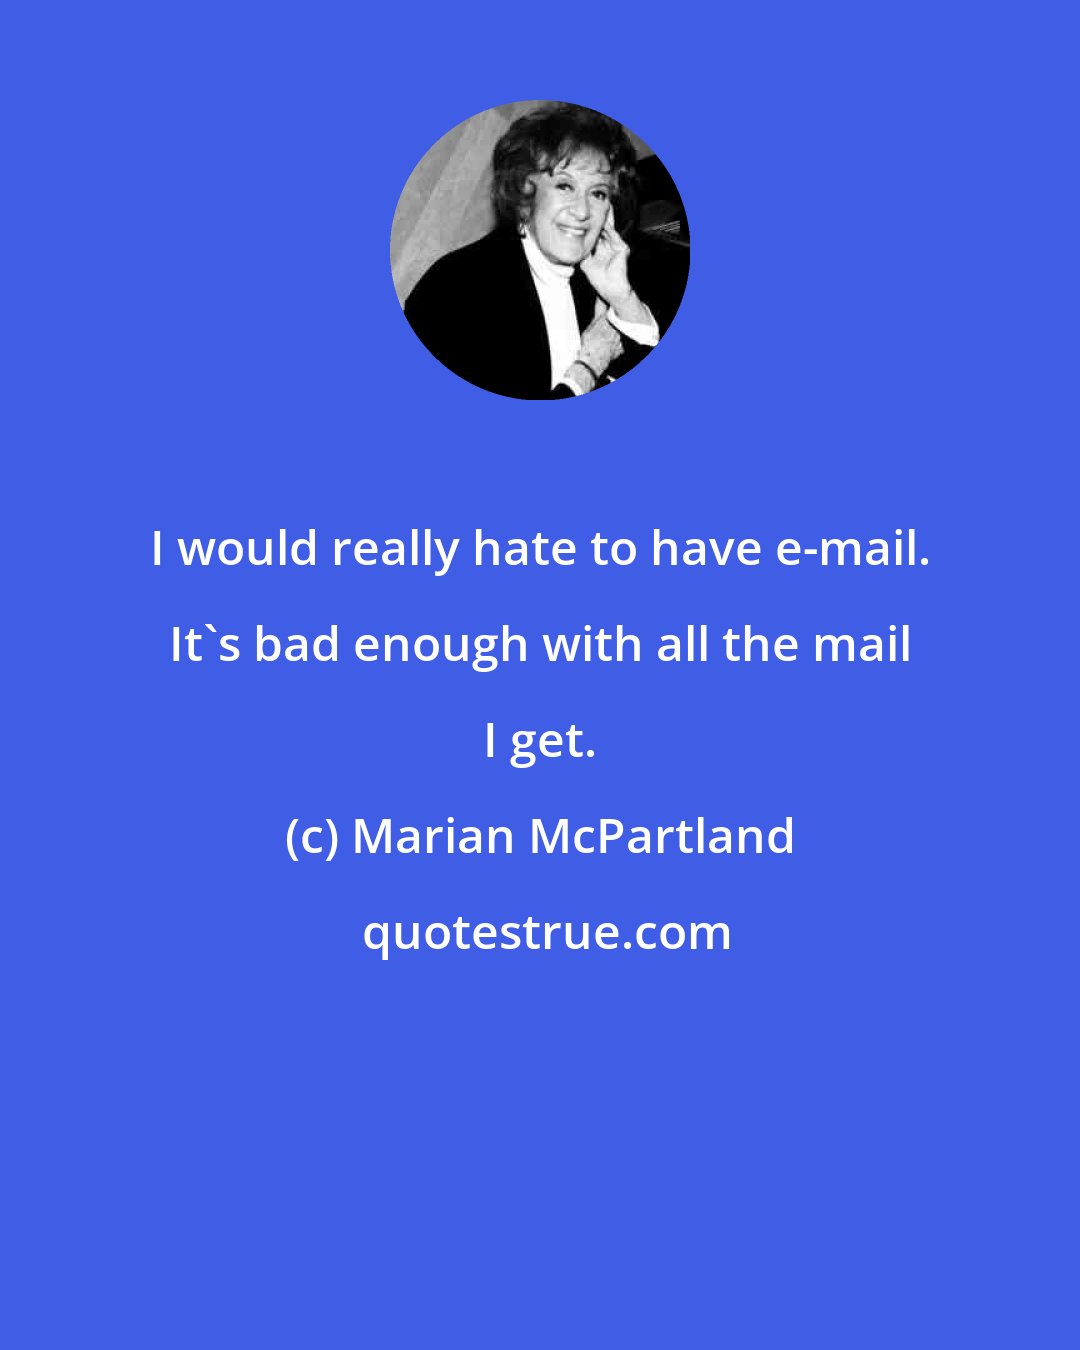 Marian McPartland: I would really hate to have e-mail. It's bad enough with all the mail I get.